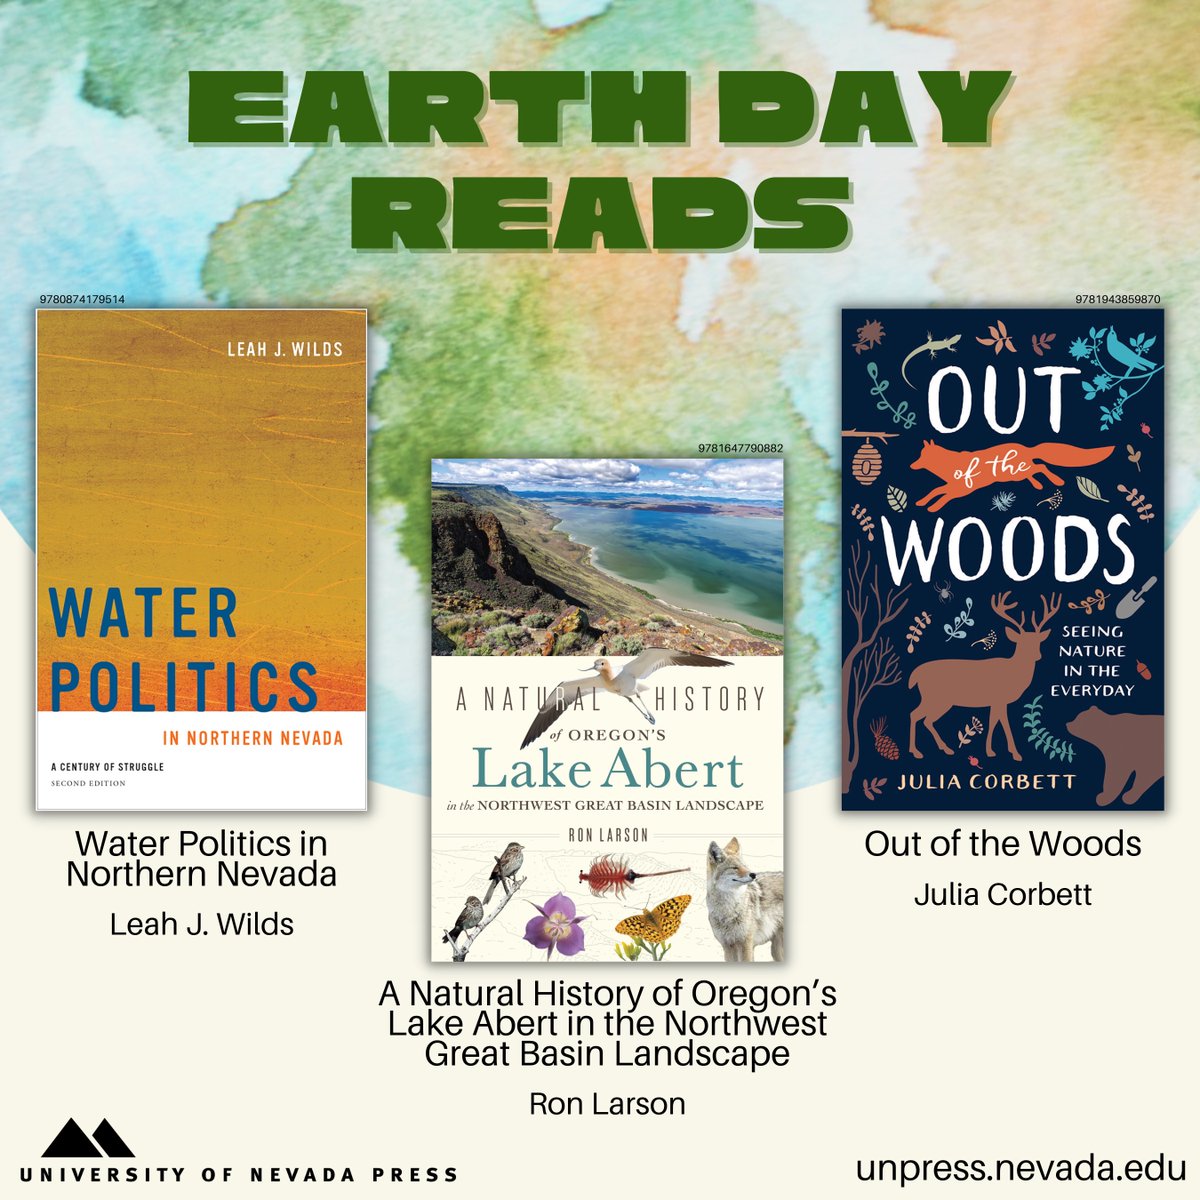 Happy Earth Day! Choose from some of our favorite titles, and read a great book today!

#UniversityOfNevadaPress #EarthDay #BookRecs #BookX